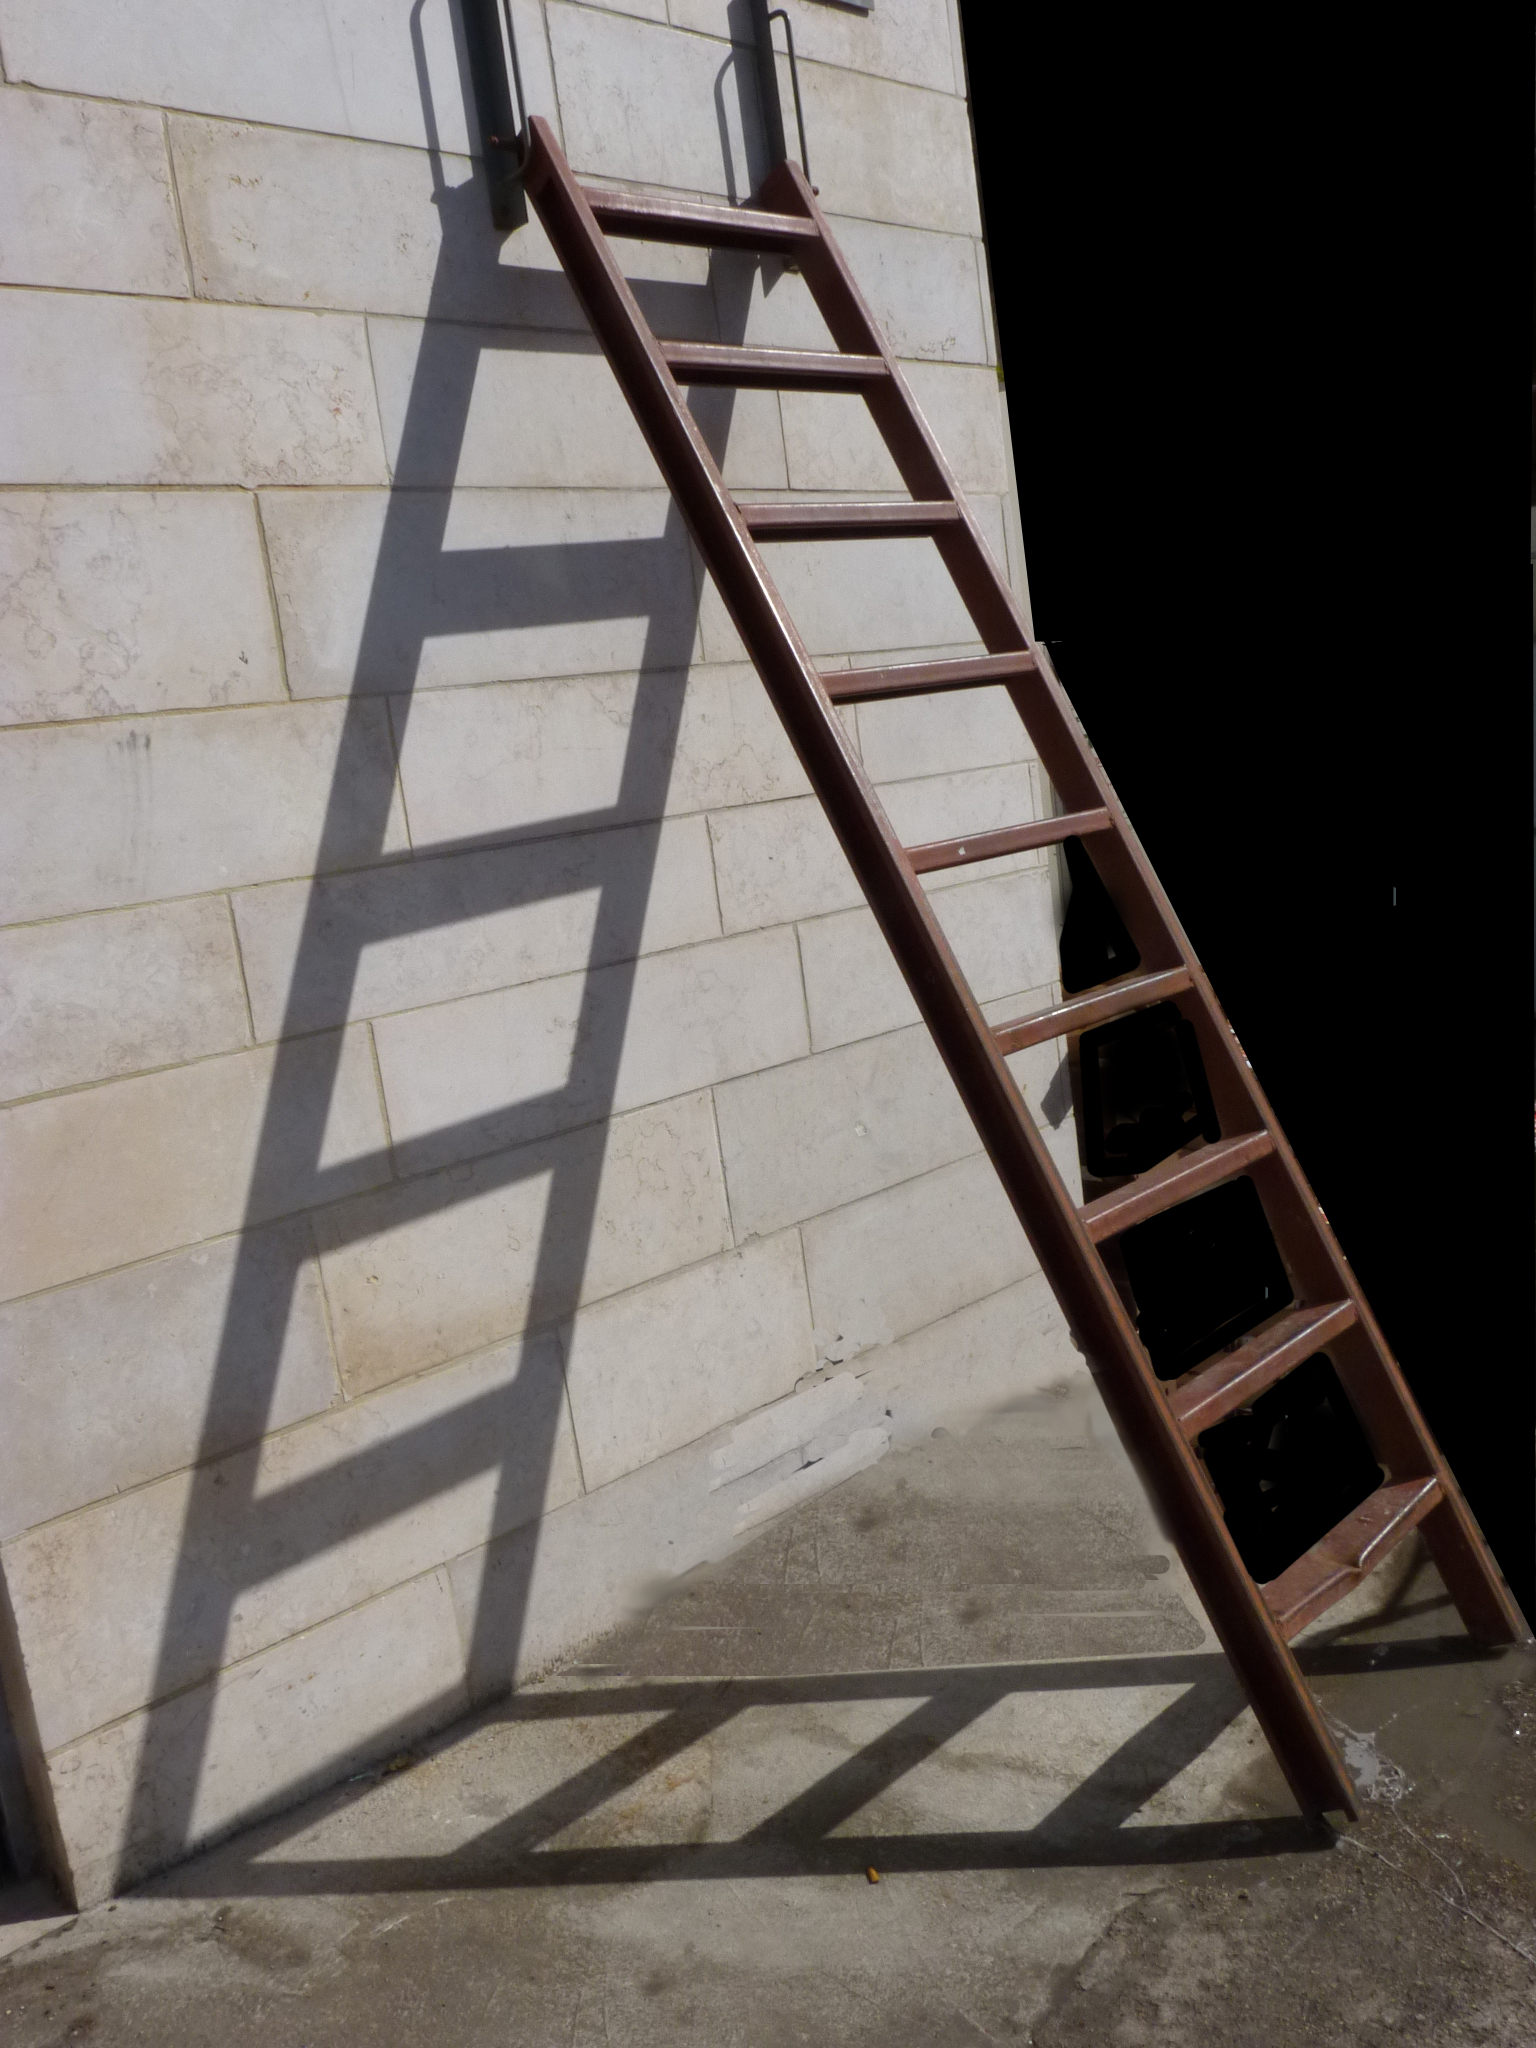 a ladder leaning against a brick wall